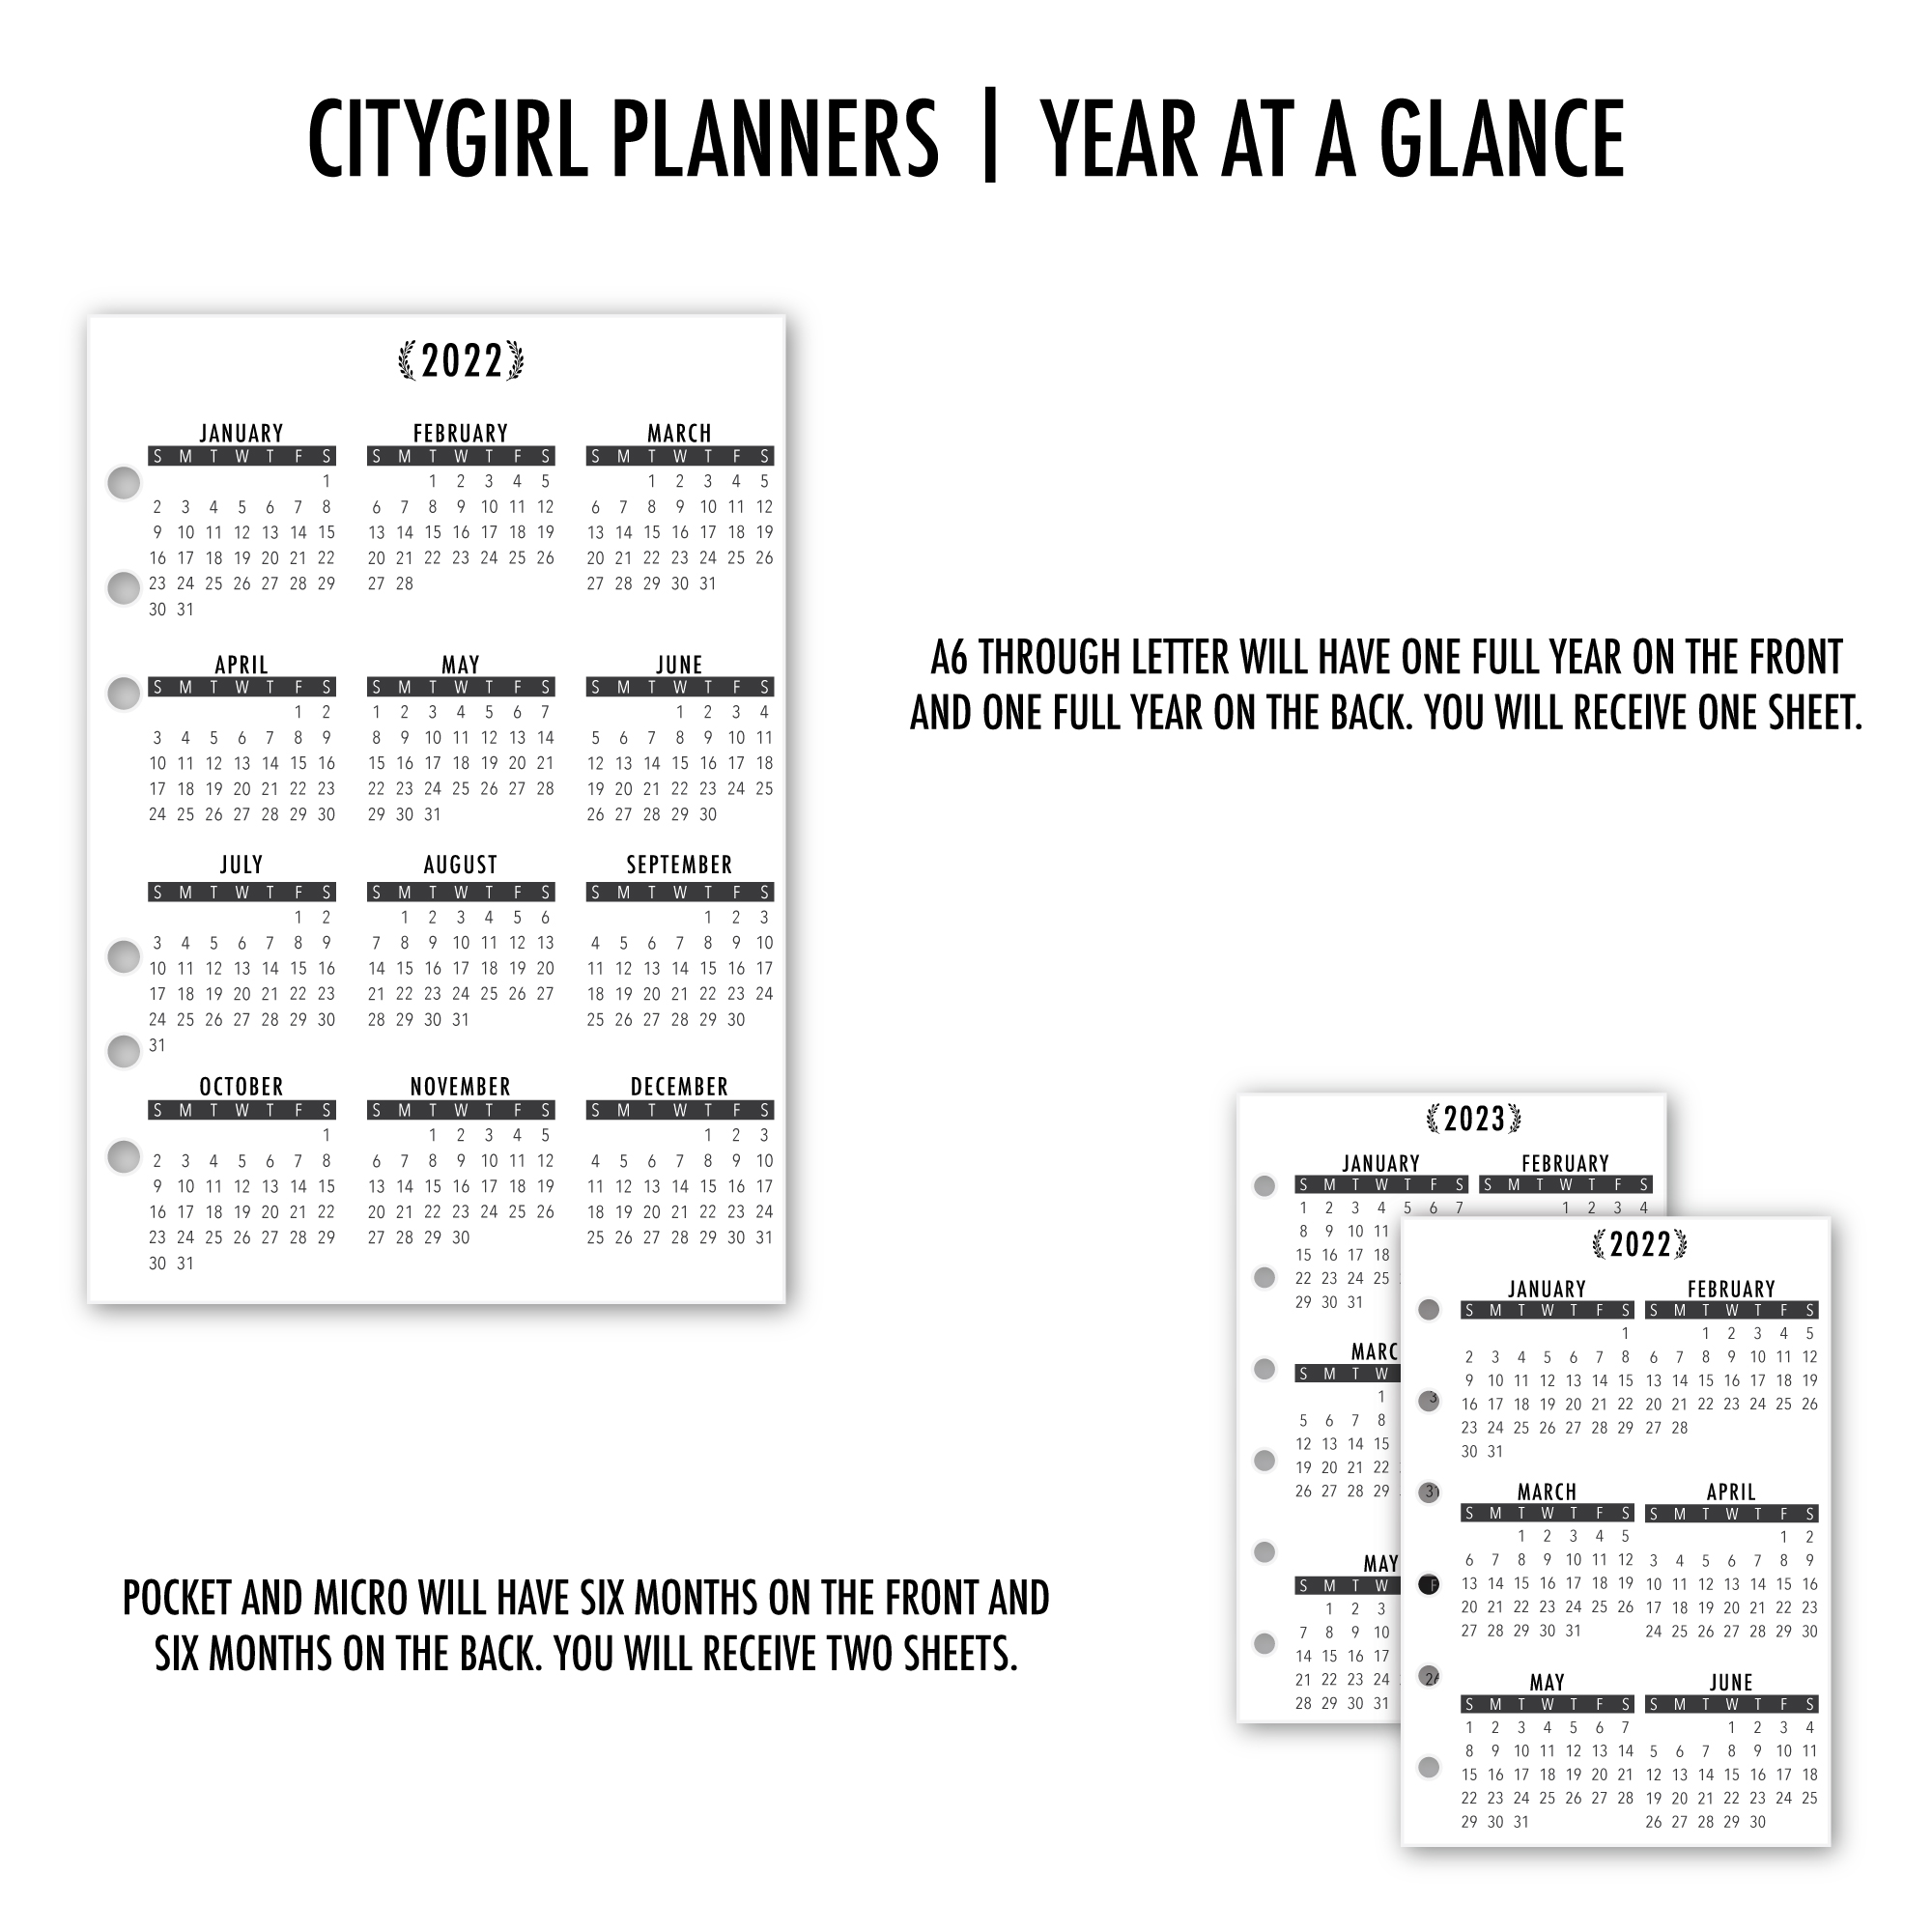 Yearly Glance sheet information